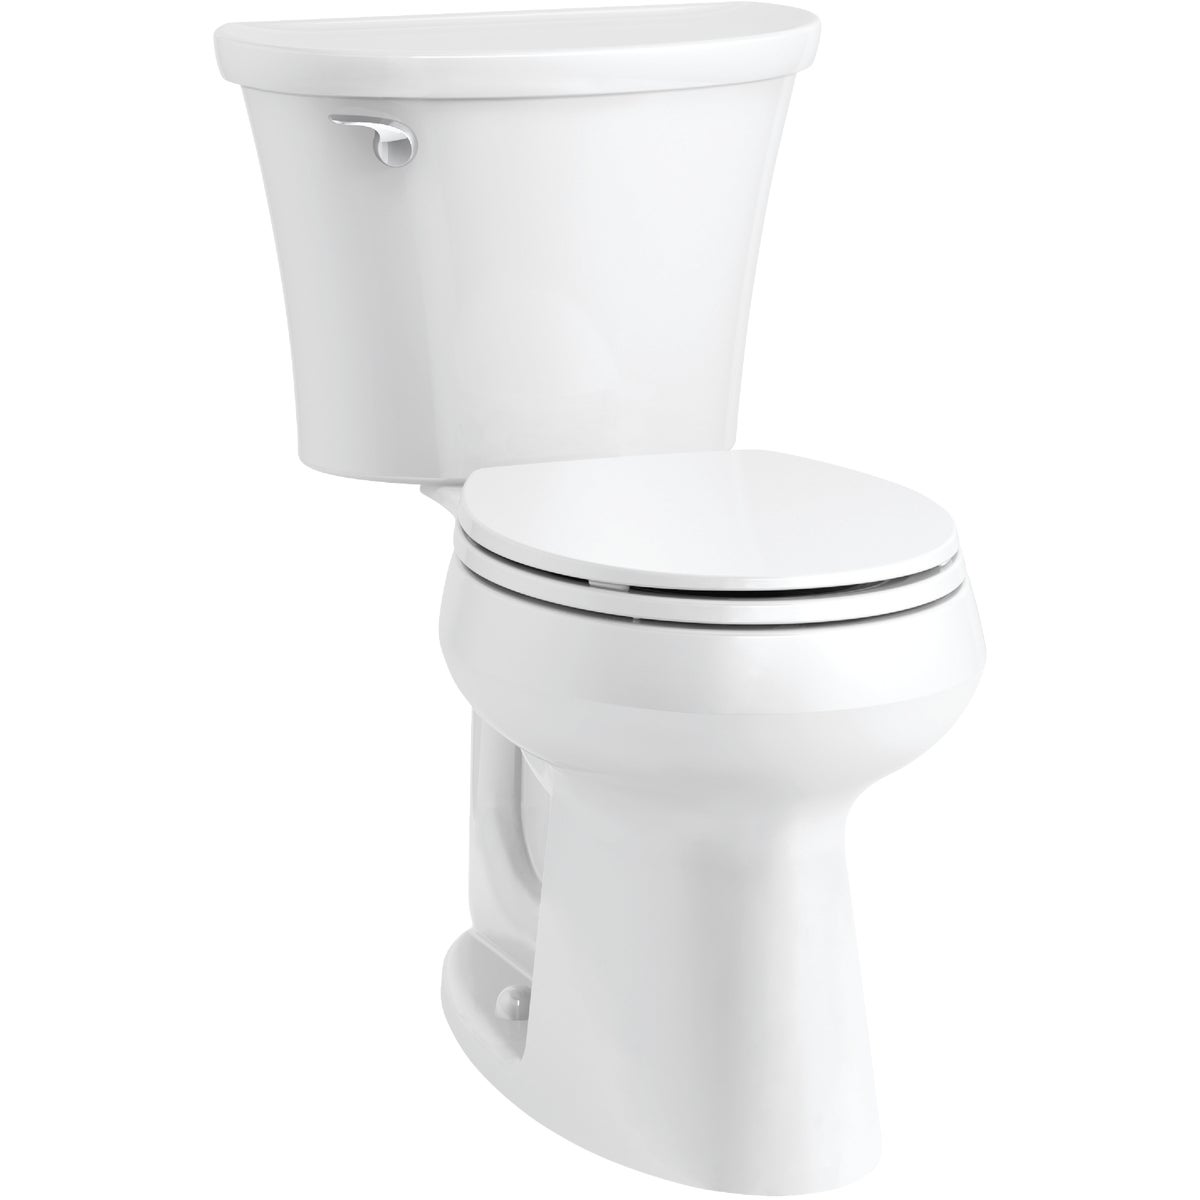 Item 480308, Complete Solution toilet provides everything needed in one box, including 